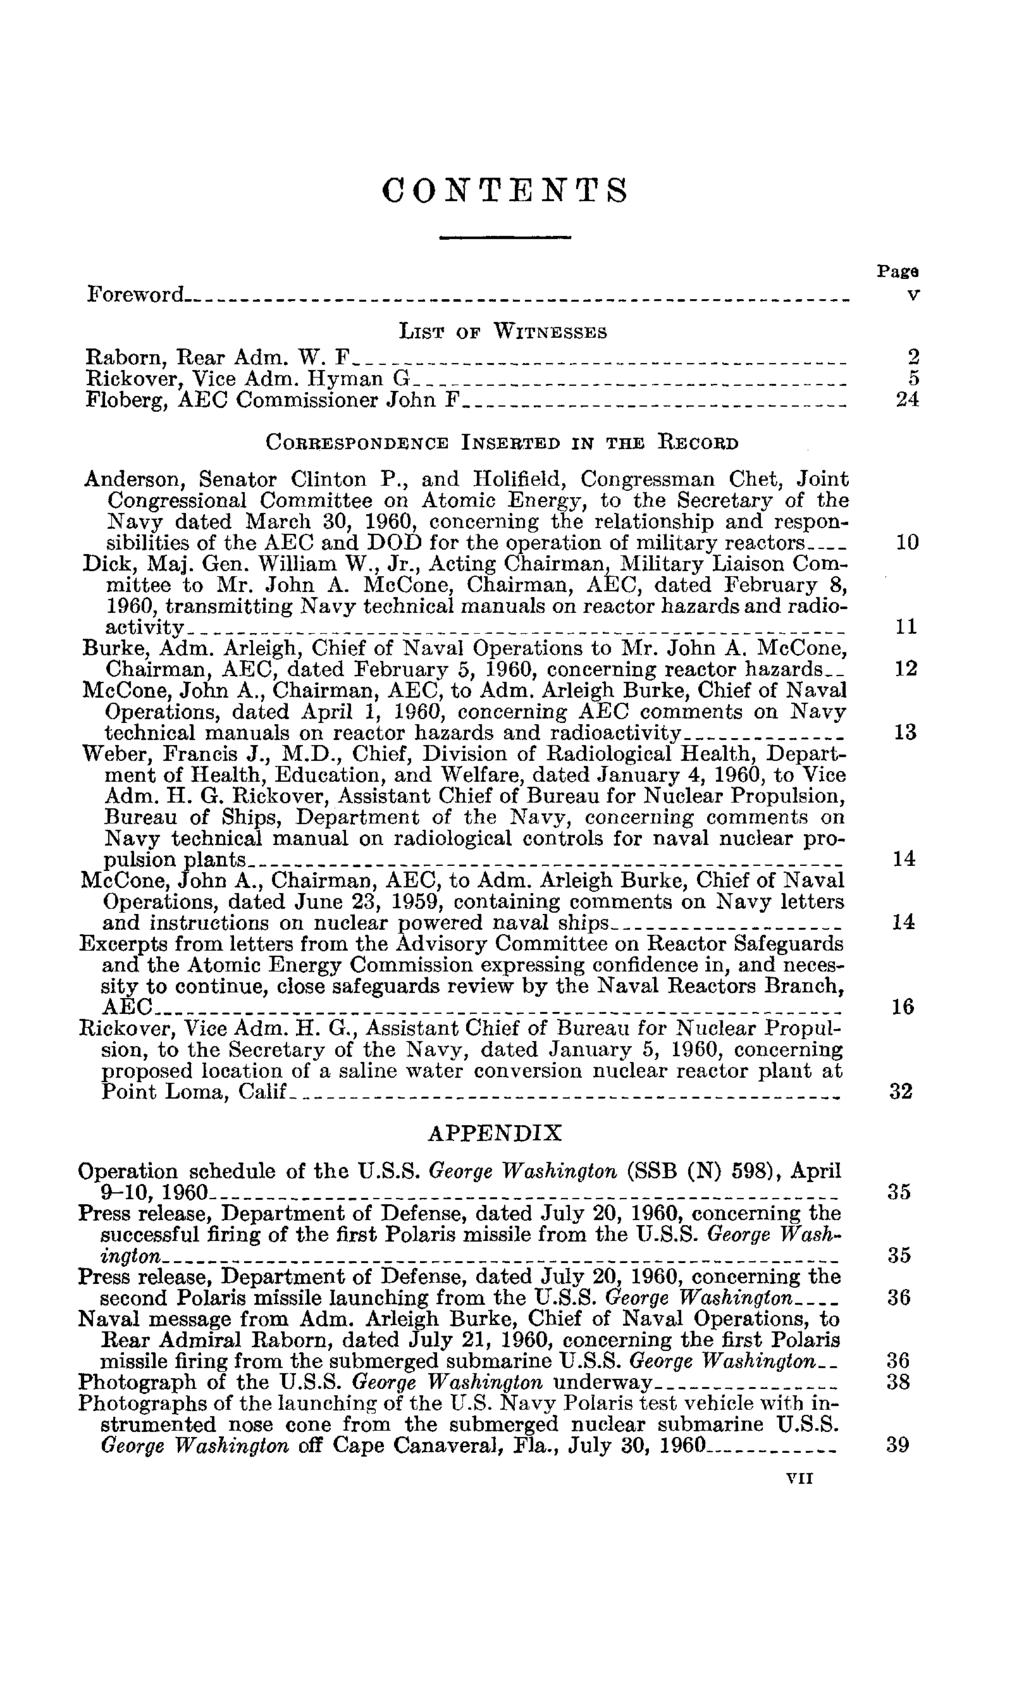 CONTENTS Foreword Page v LIST OF WITNESSES Raborn, Rear Adm. W. F 2 Rickover, Vice Adm. Hyman G 5 Floberg, AEC Commissioner John F 24 CORRESPONDENCE INSERTED IN THE RECORD Anderson, Senator Clinton P.